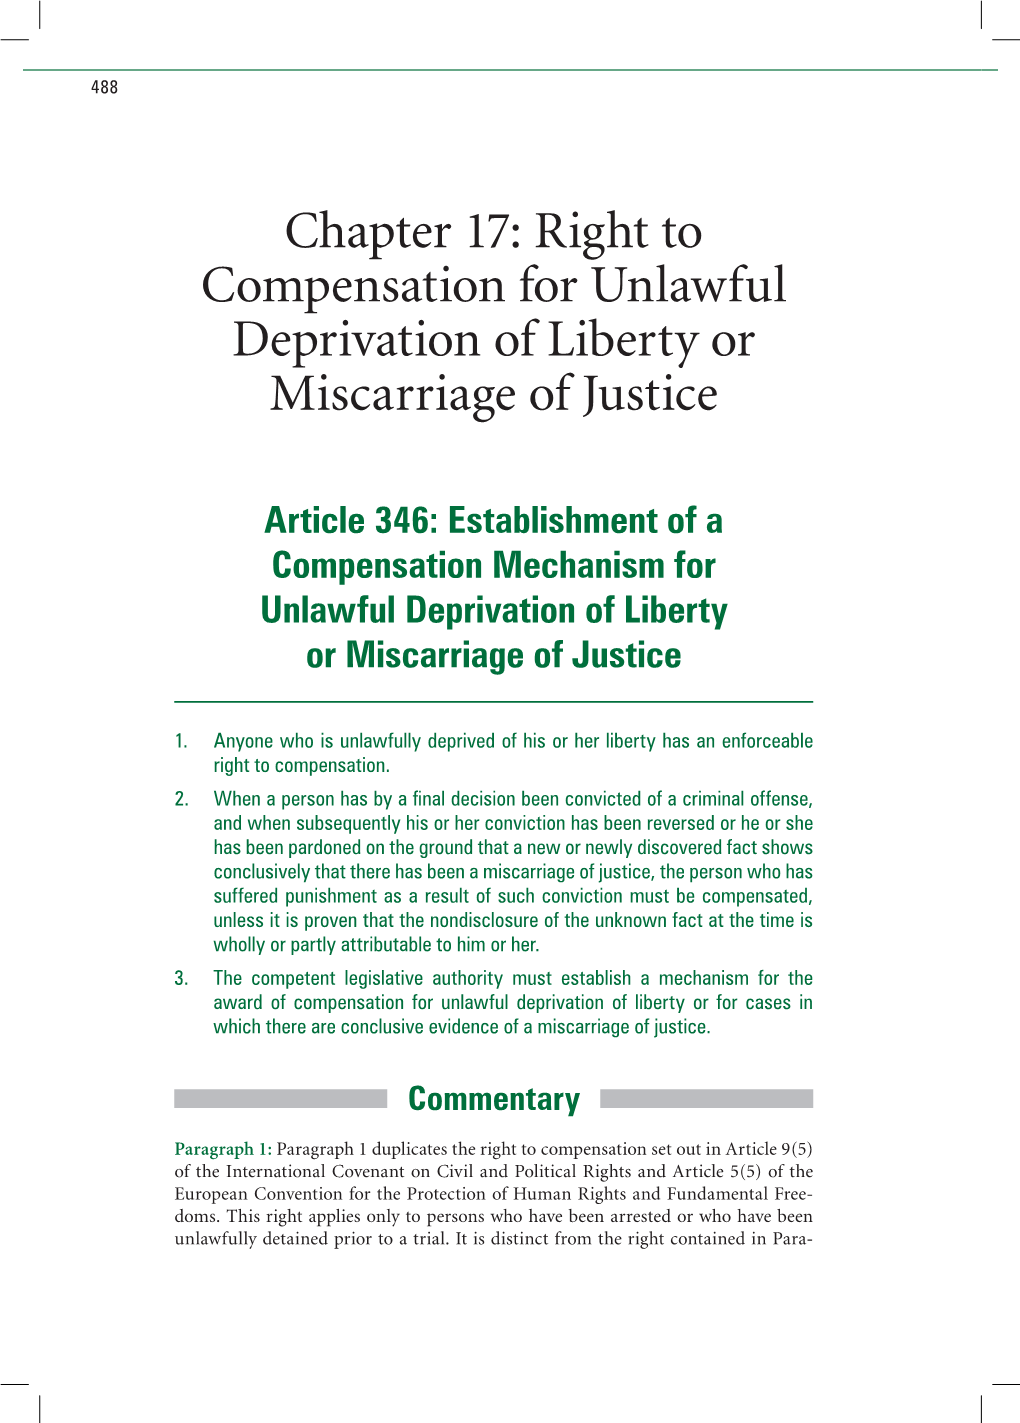 Chapter 17: Right to Compensation for Unlawful Deprivation of Liberty Or Miscarriage of Justice